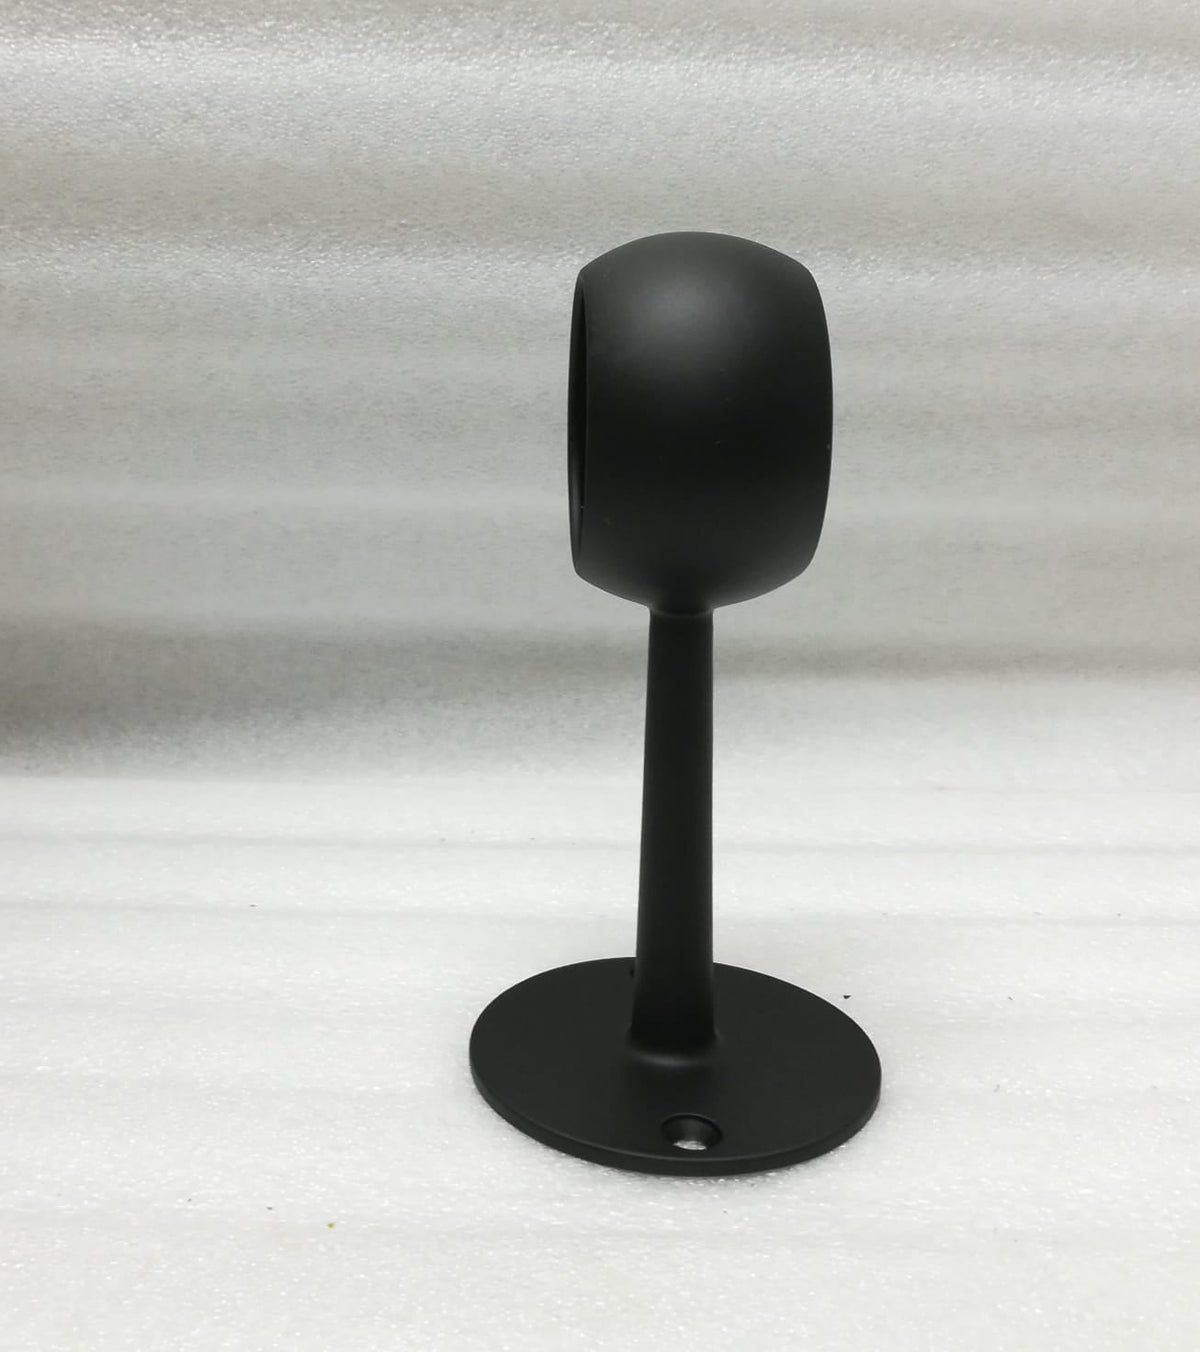 6" Tall Ball Center Post For 2" Tubing BRACKETS,COMPONENTS FOR 2" OD TUBING,DRAPERY HARDWARE,POST FITTINGS MatteBlackPowderCoatedFinish Trade Diversified